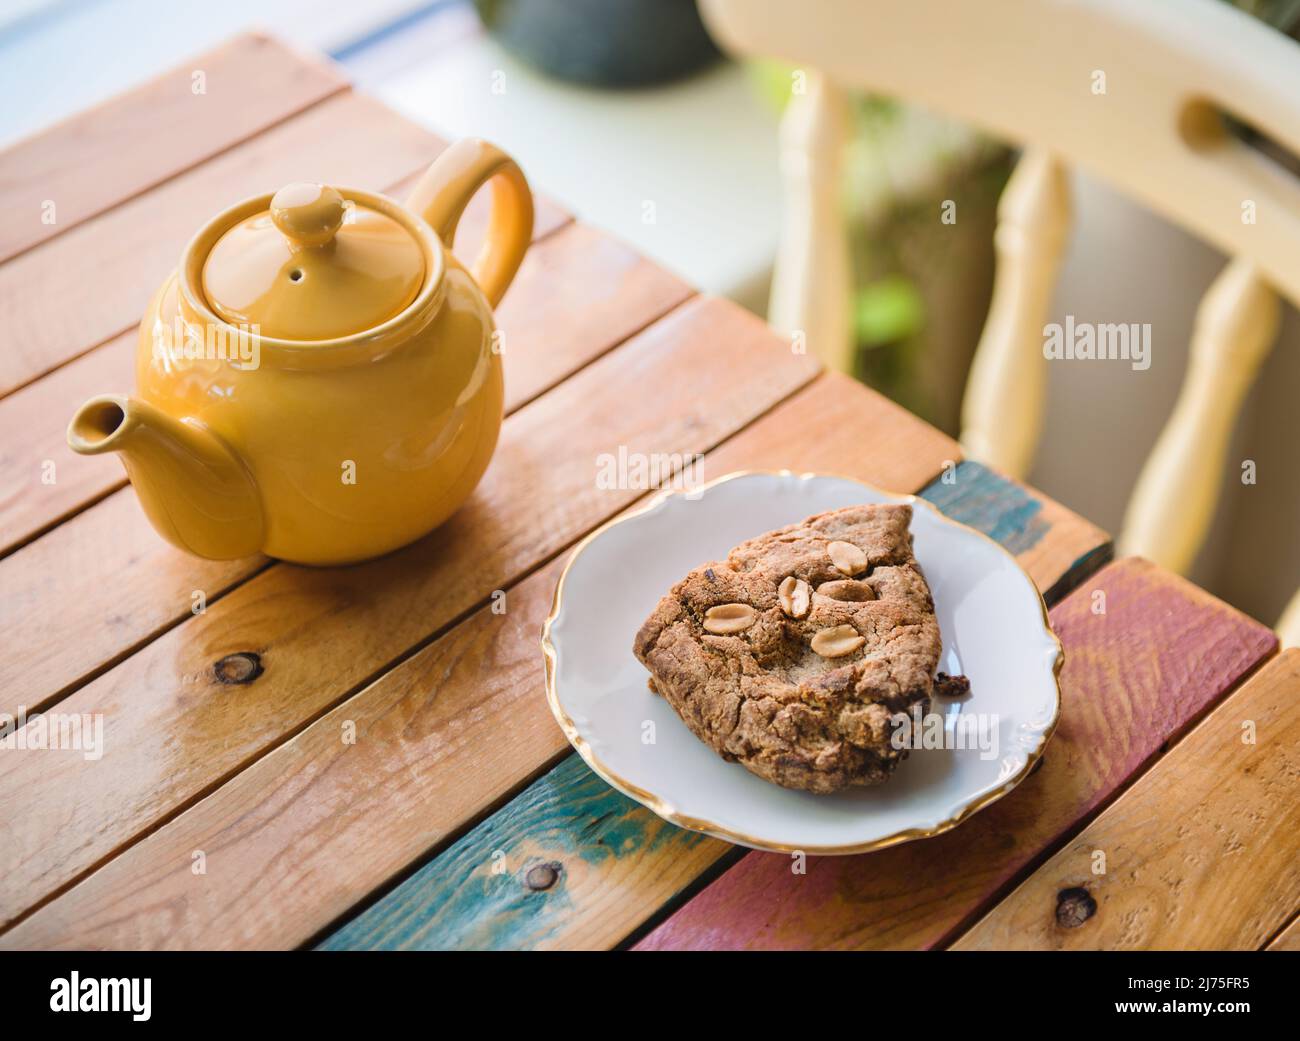 A pot of tea with an almond pastry on a wooden table Stock Photo